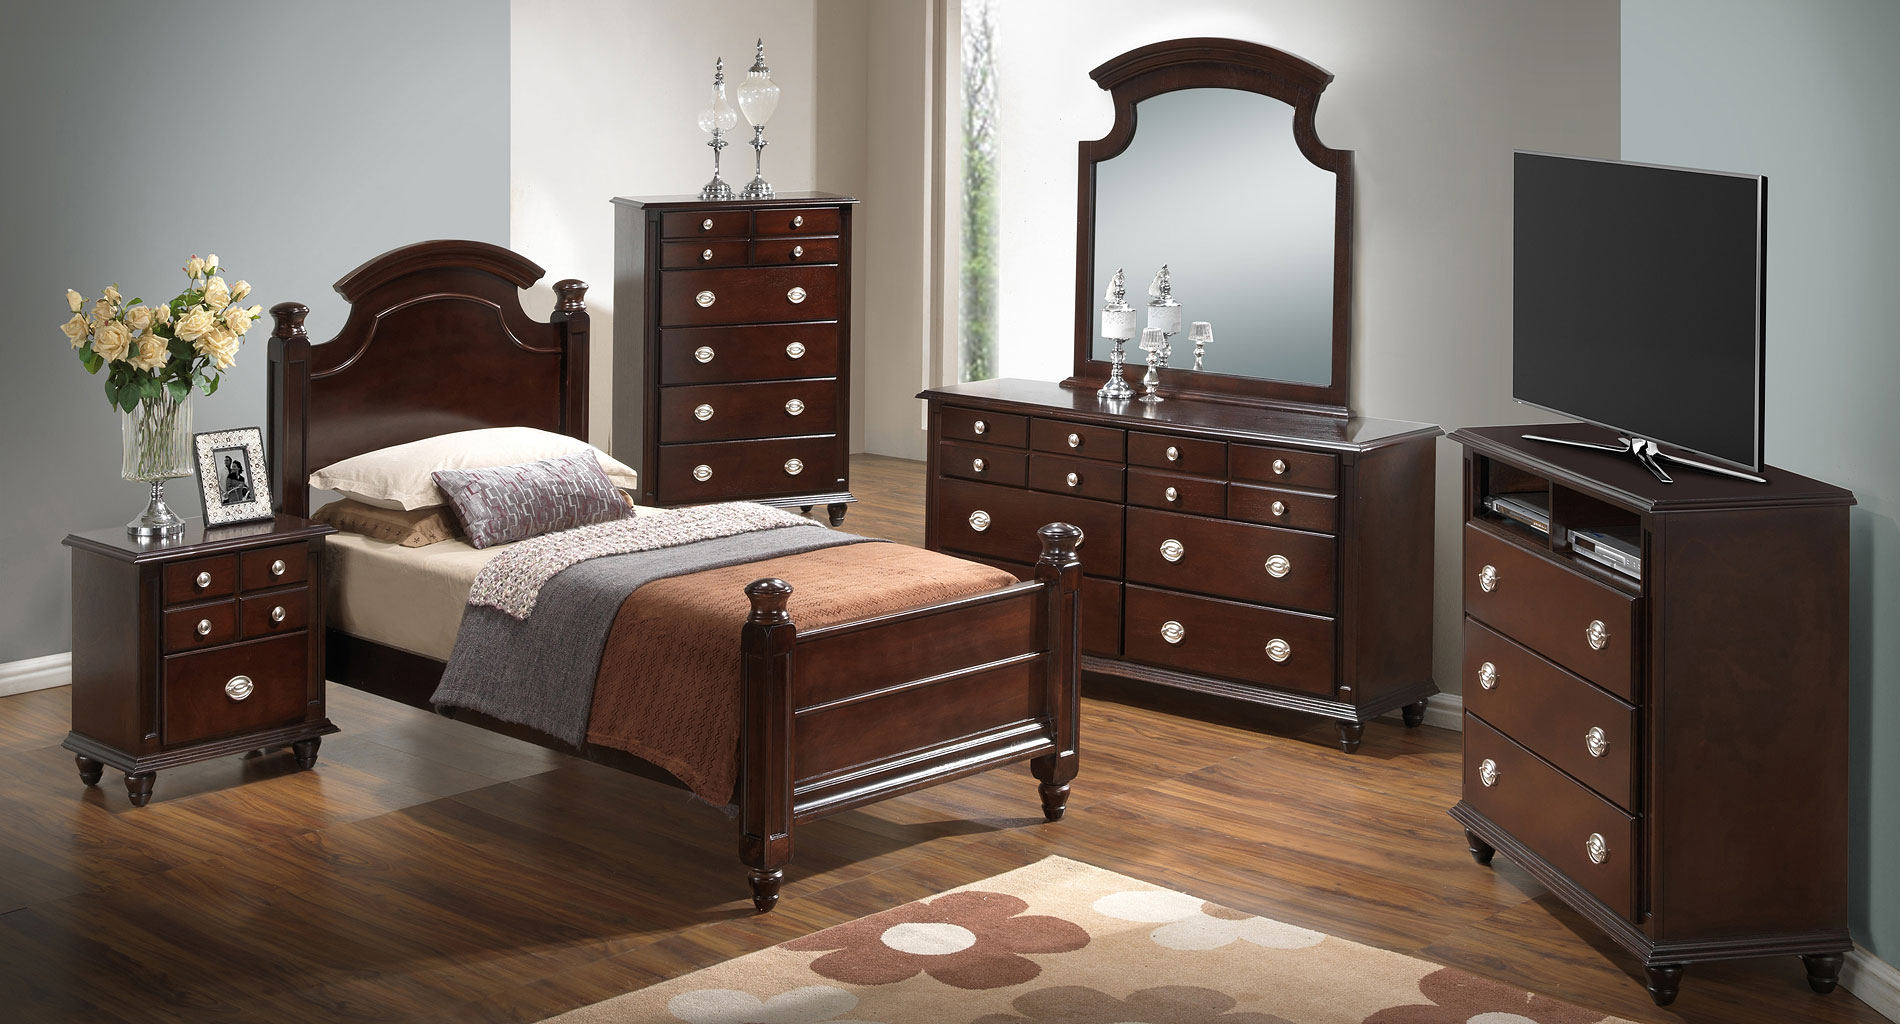 Glory Furniture G3100D 5-Piece Low Profile Storage Bedroom Set in Cherry